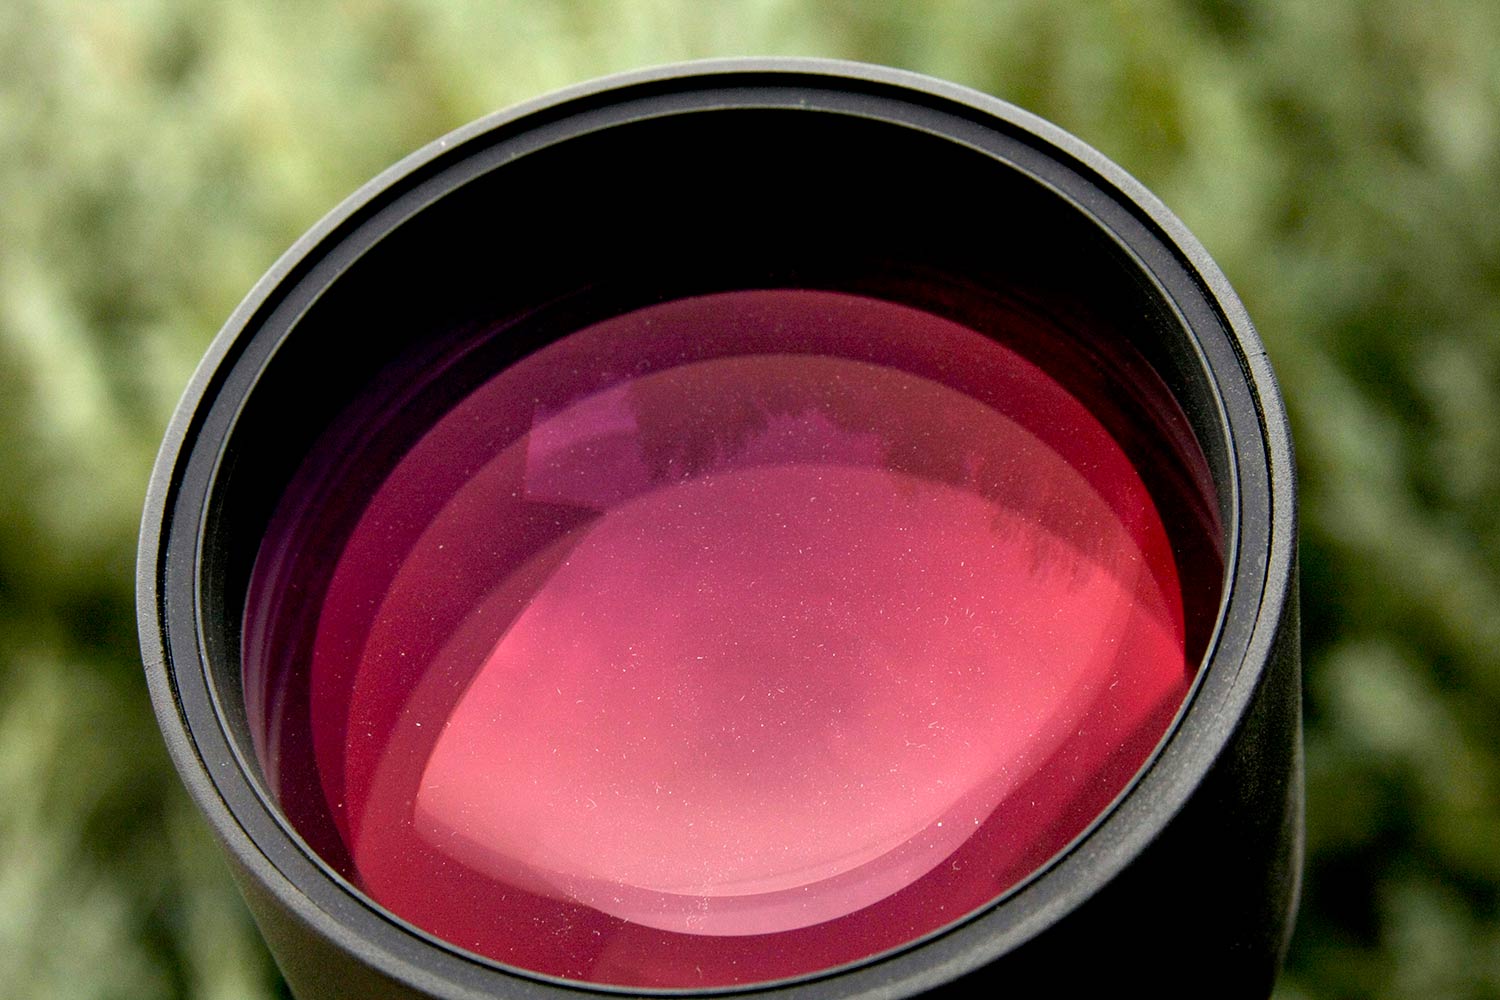 A rose tinted riflescope lens.